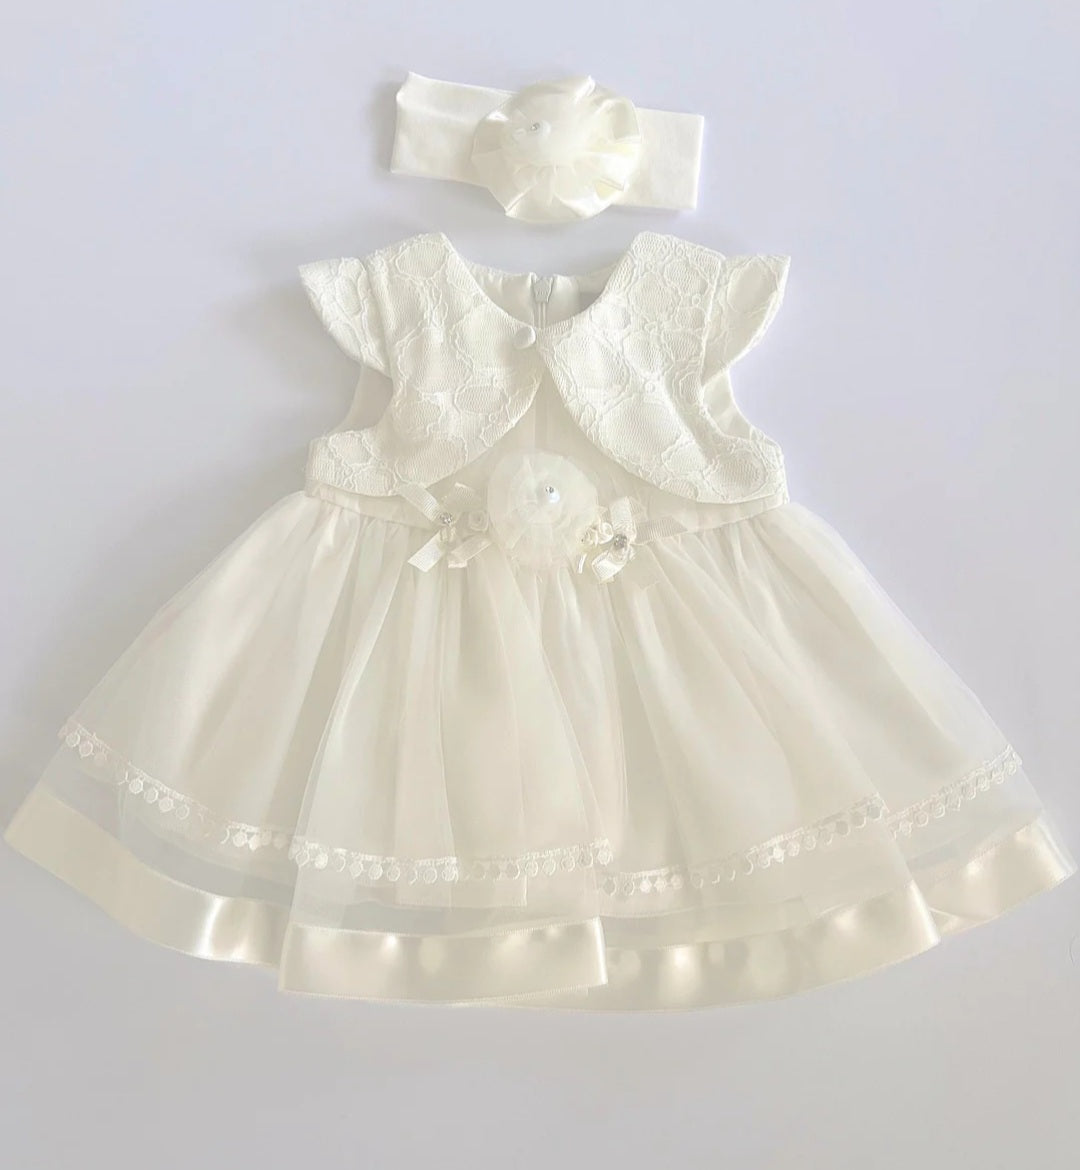 Baby IVORY dress with lace jacket 14396